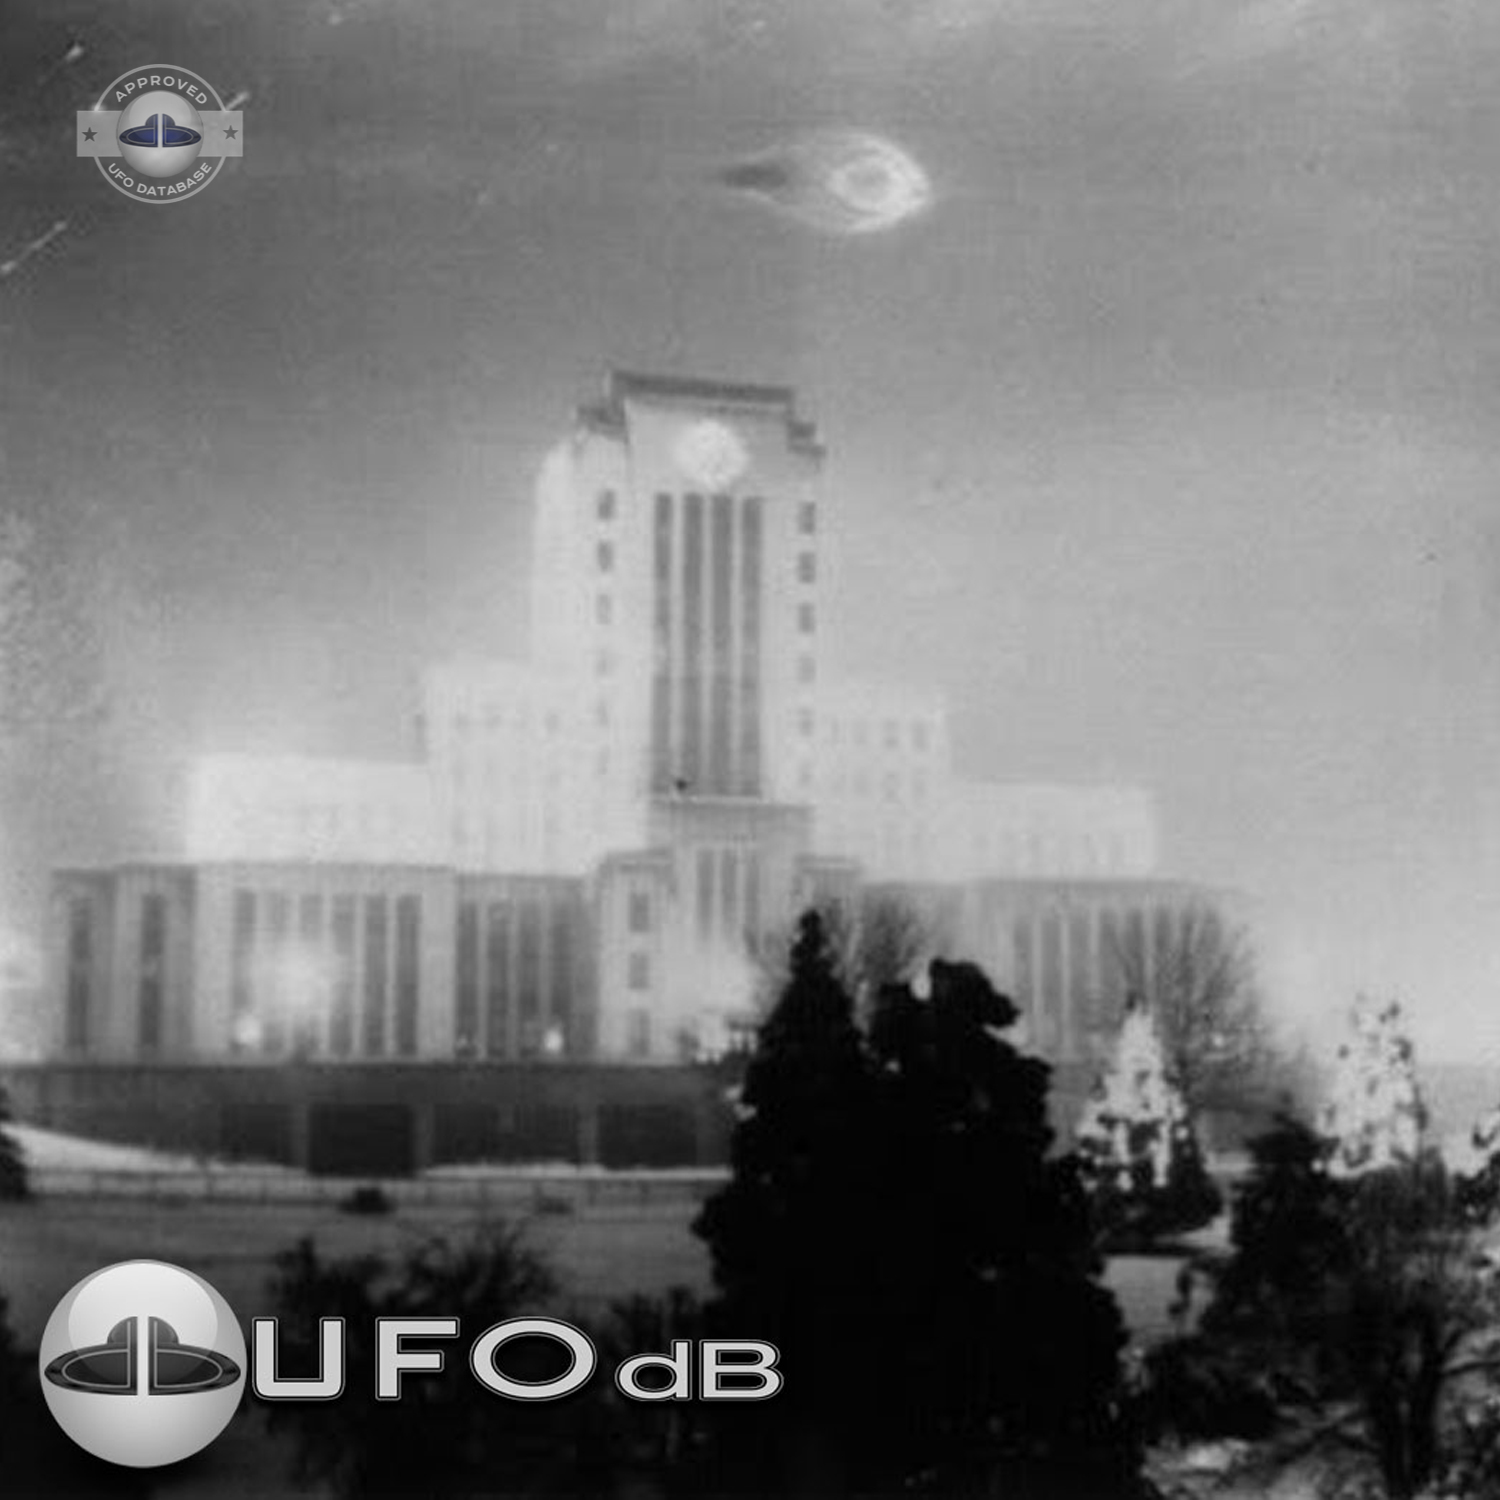 UFO moved straight in the sky stopping over flagpole of the city hall UFO Picture #87-2